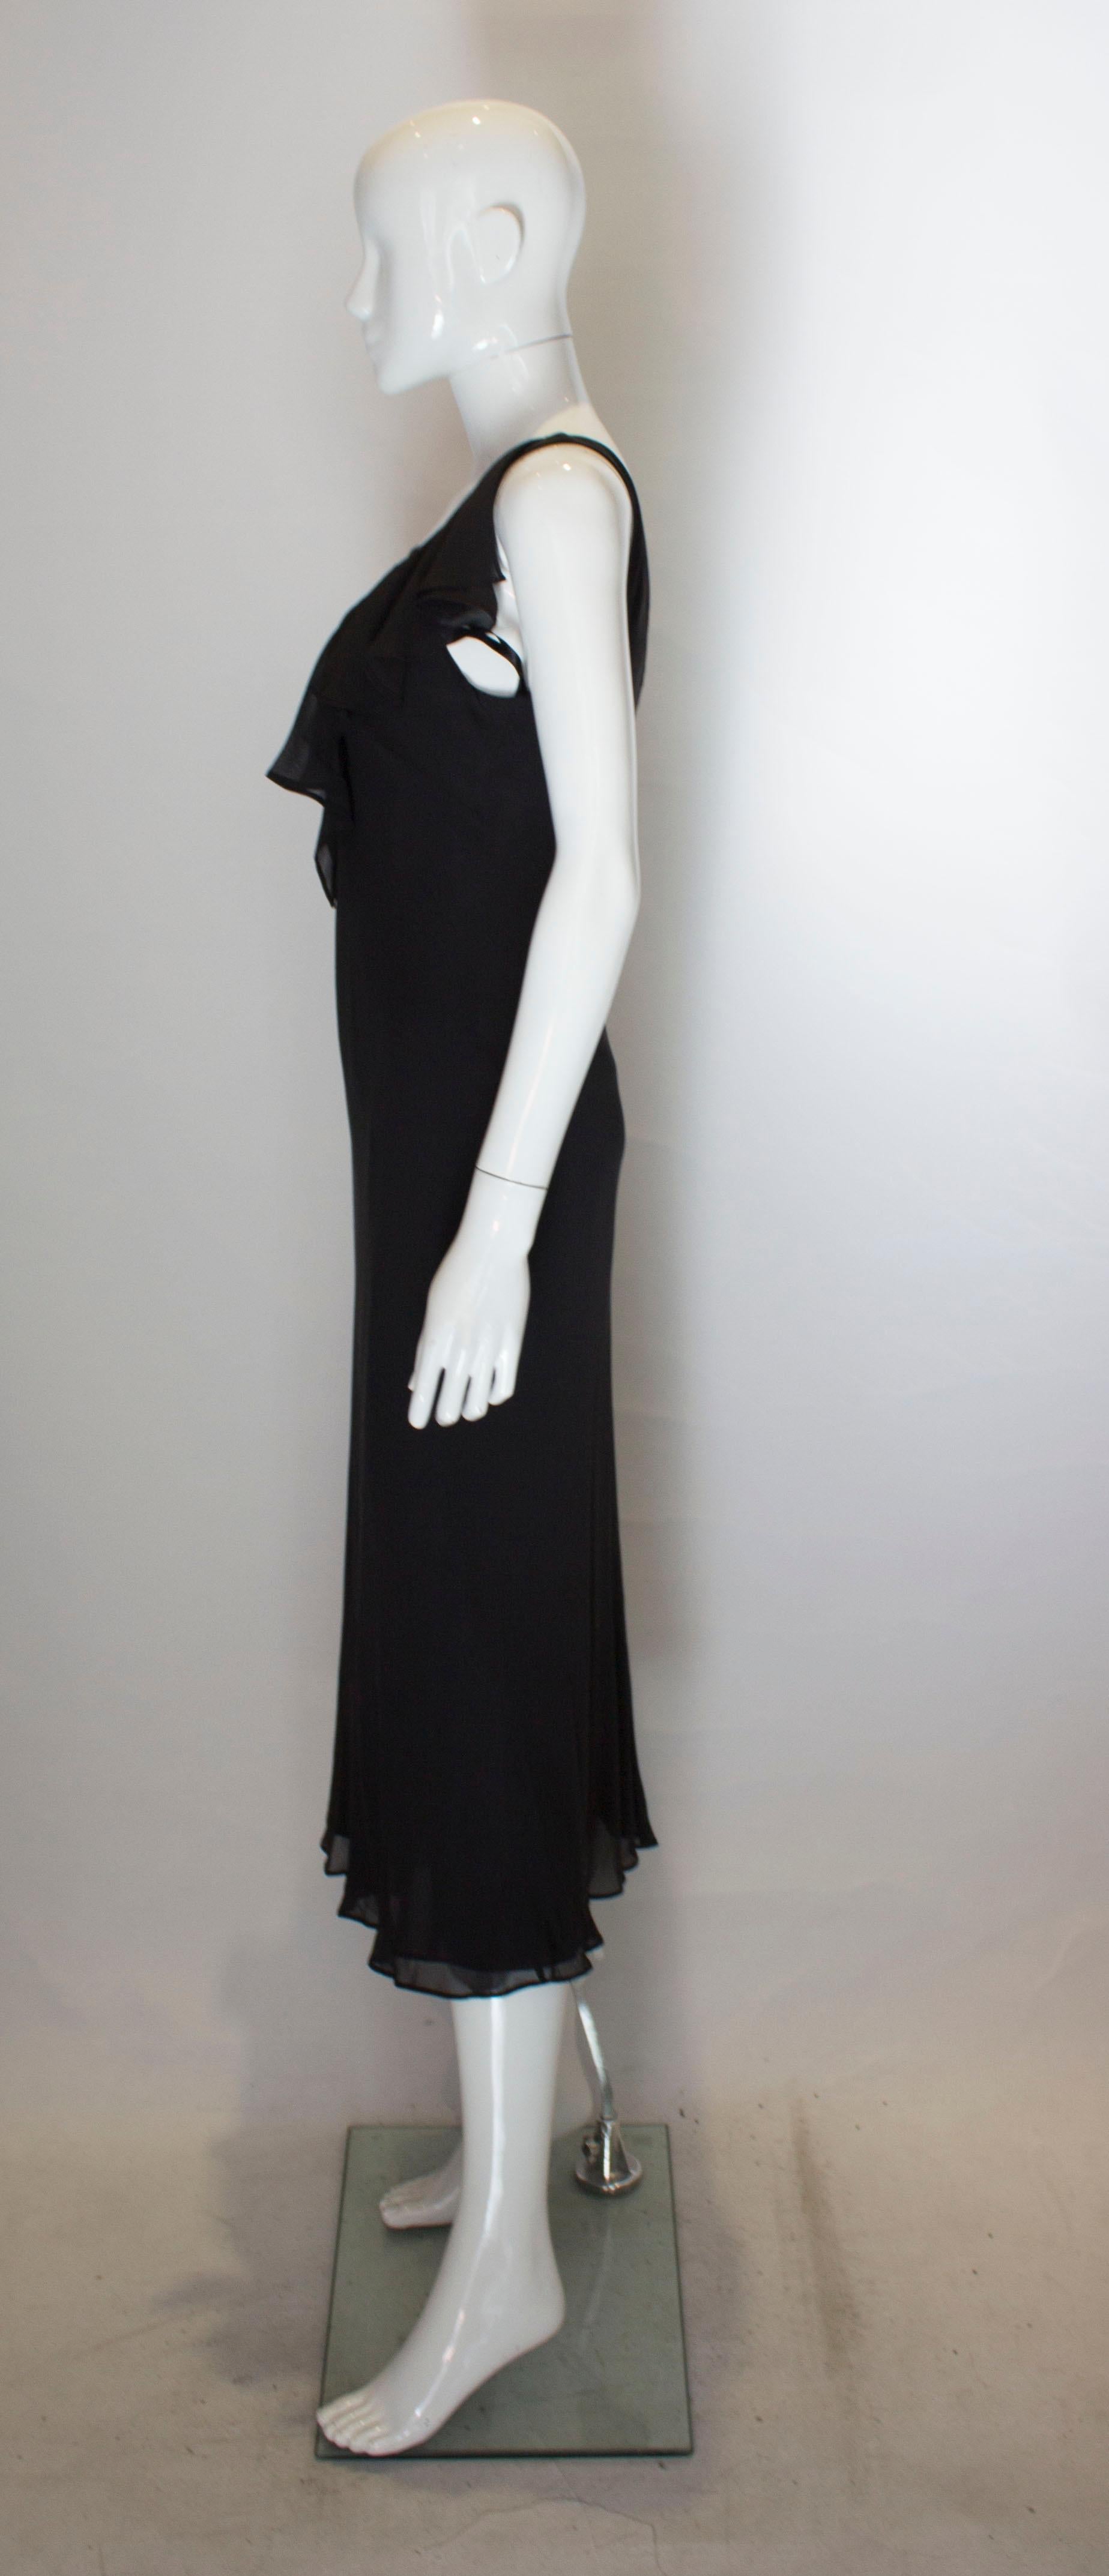 Women's Vintage Slip Dress with Ruffle at Neckline For Sale